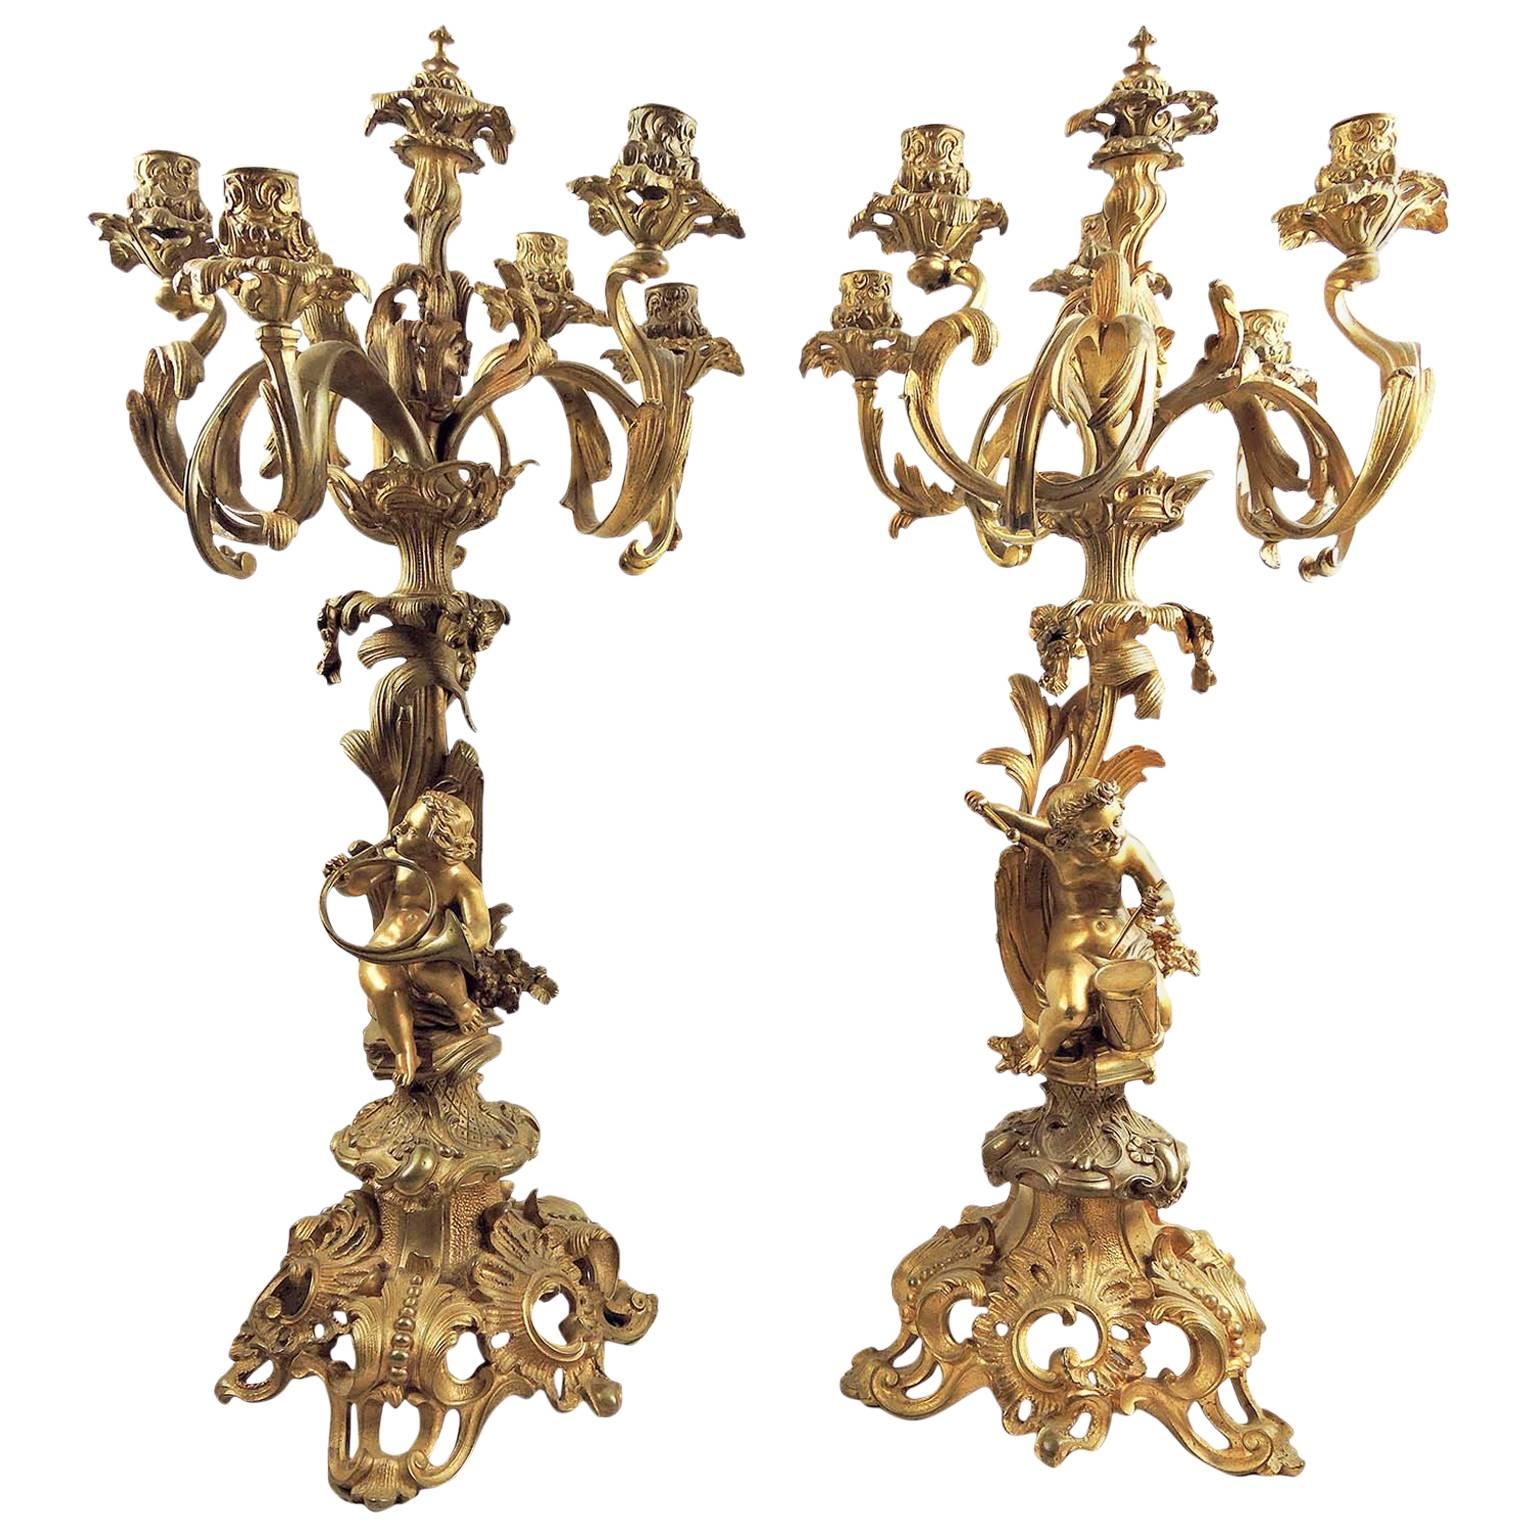 Pair of Large 19th Century Gilt Bronze-Mounted Six-Arm Figural Rococo Candelabra For Sale